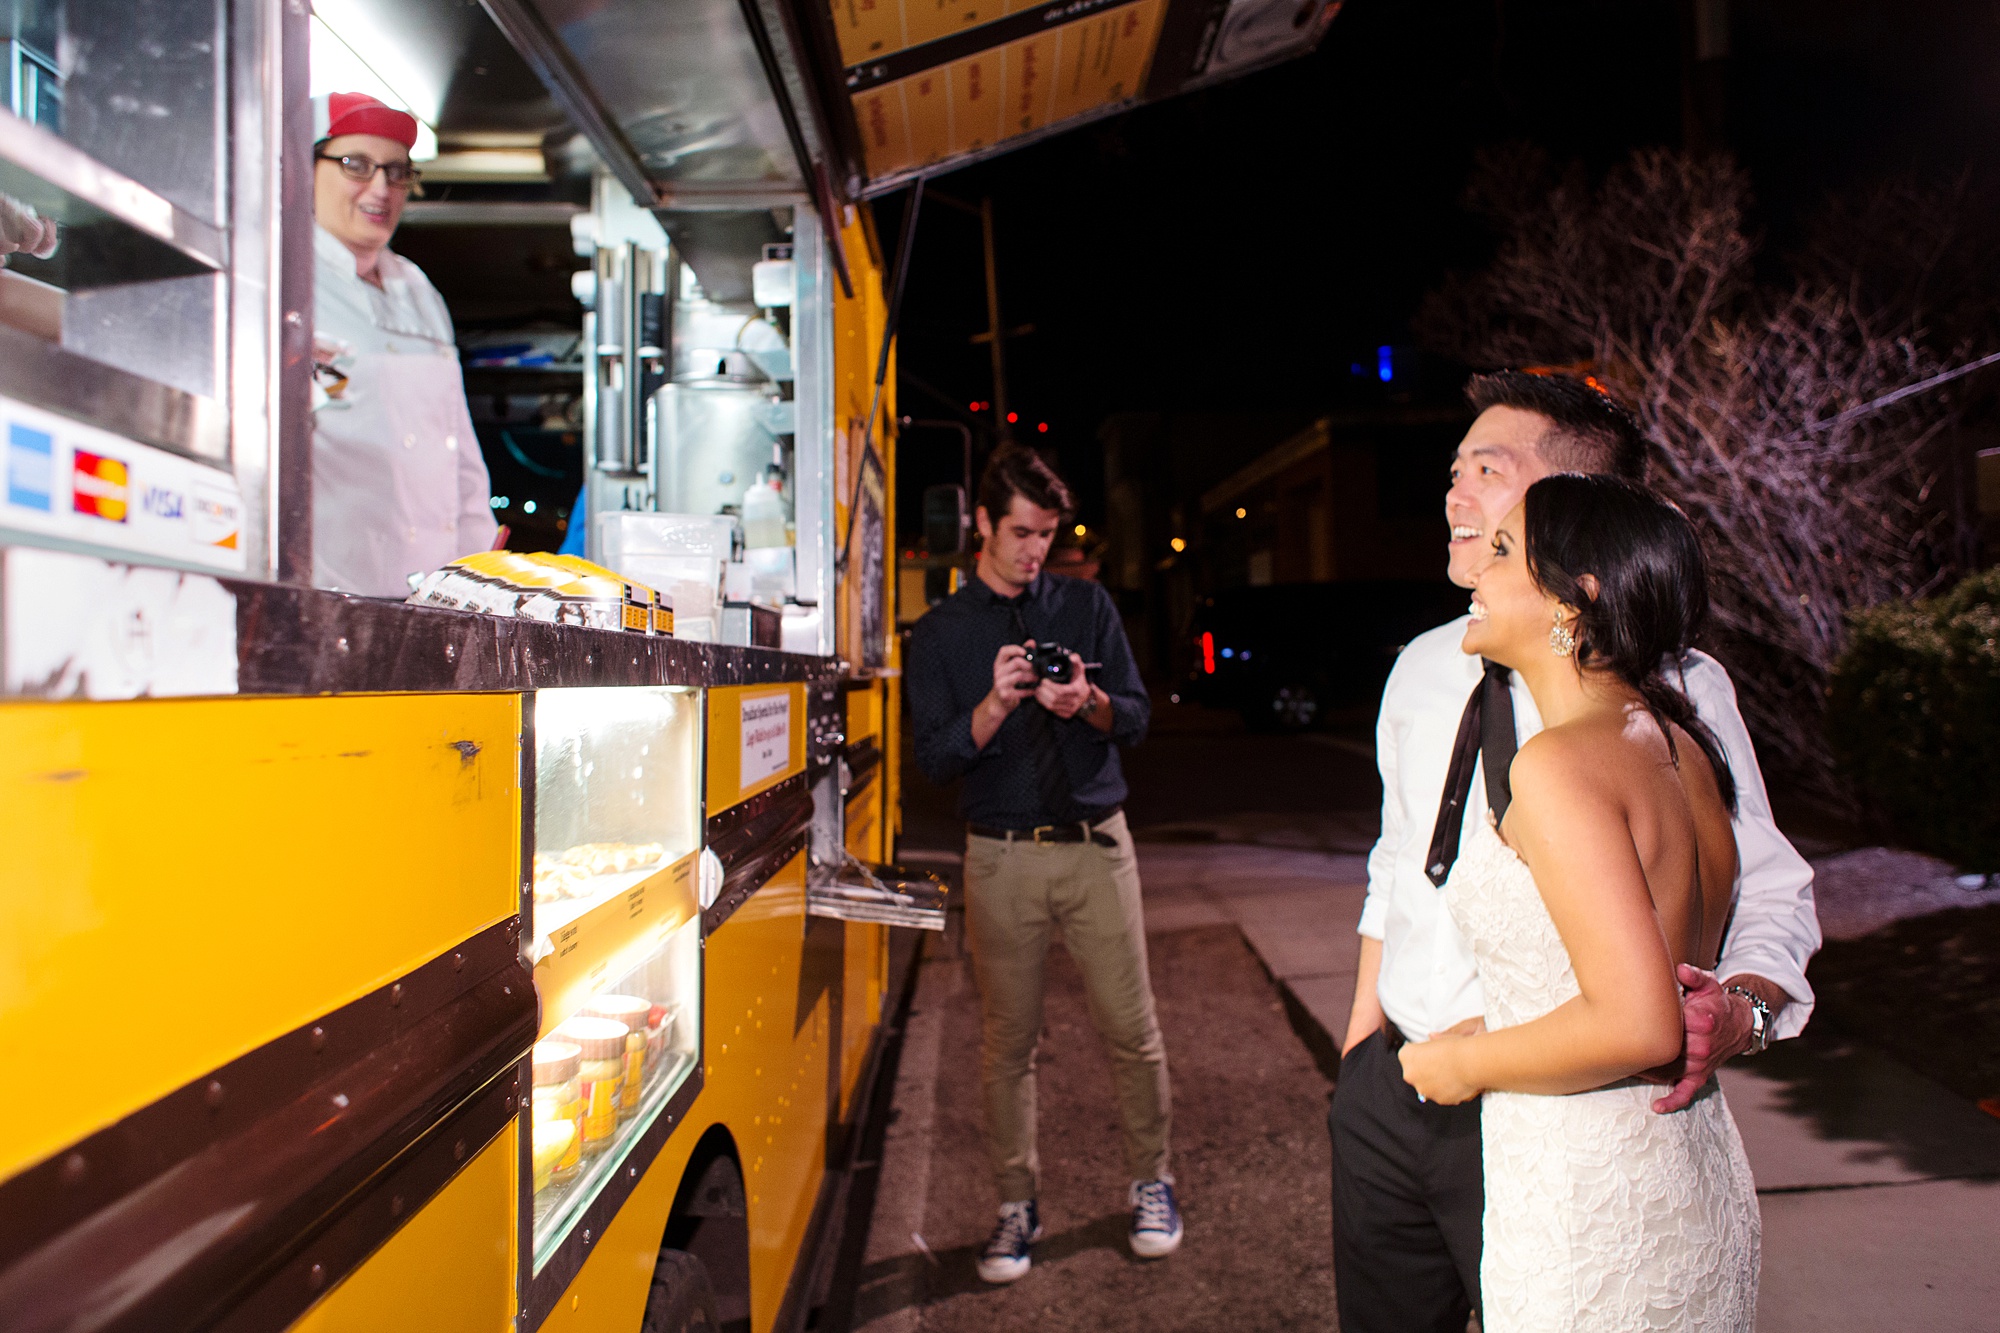 Wafels & Dinges food truck is shown from the side at night with bride and groom standing in front of window deciding what to order as cook smiles back in a photo by Kyo Morishima